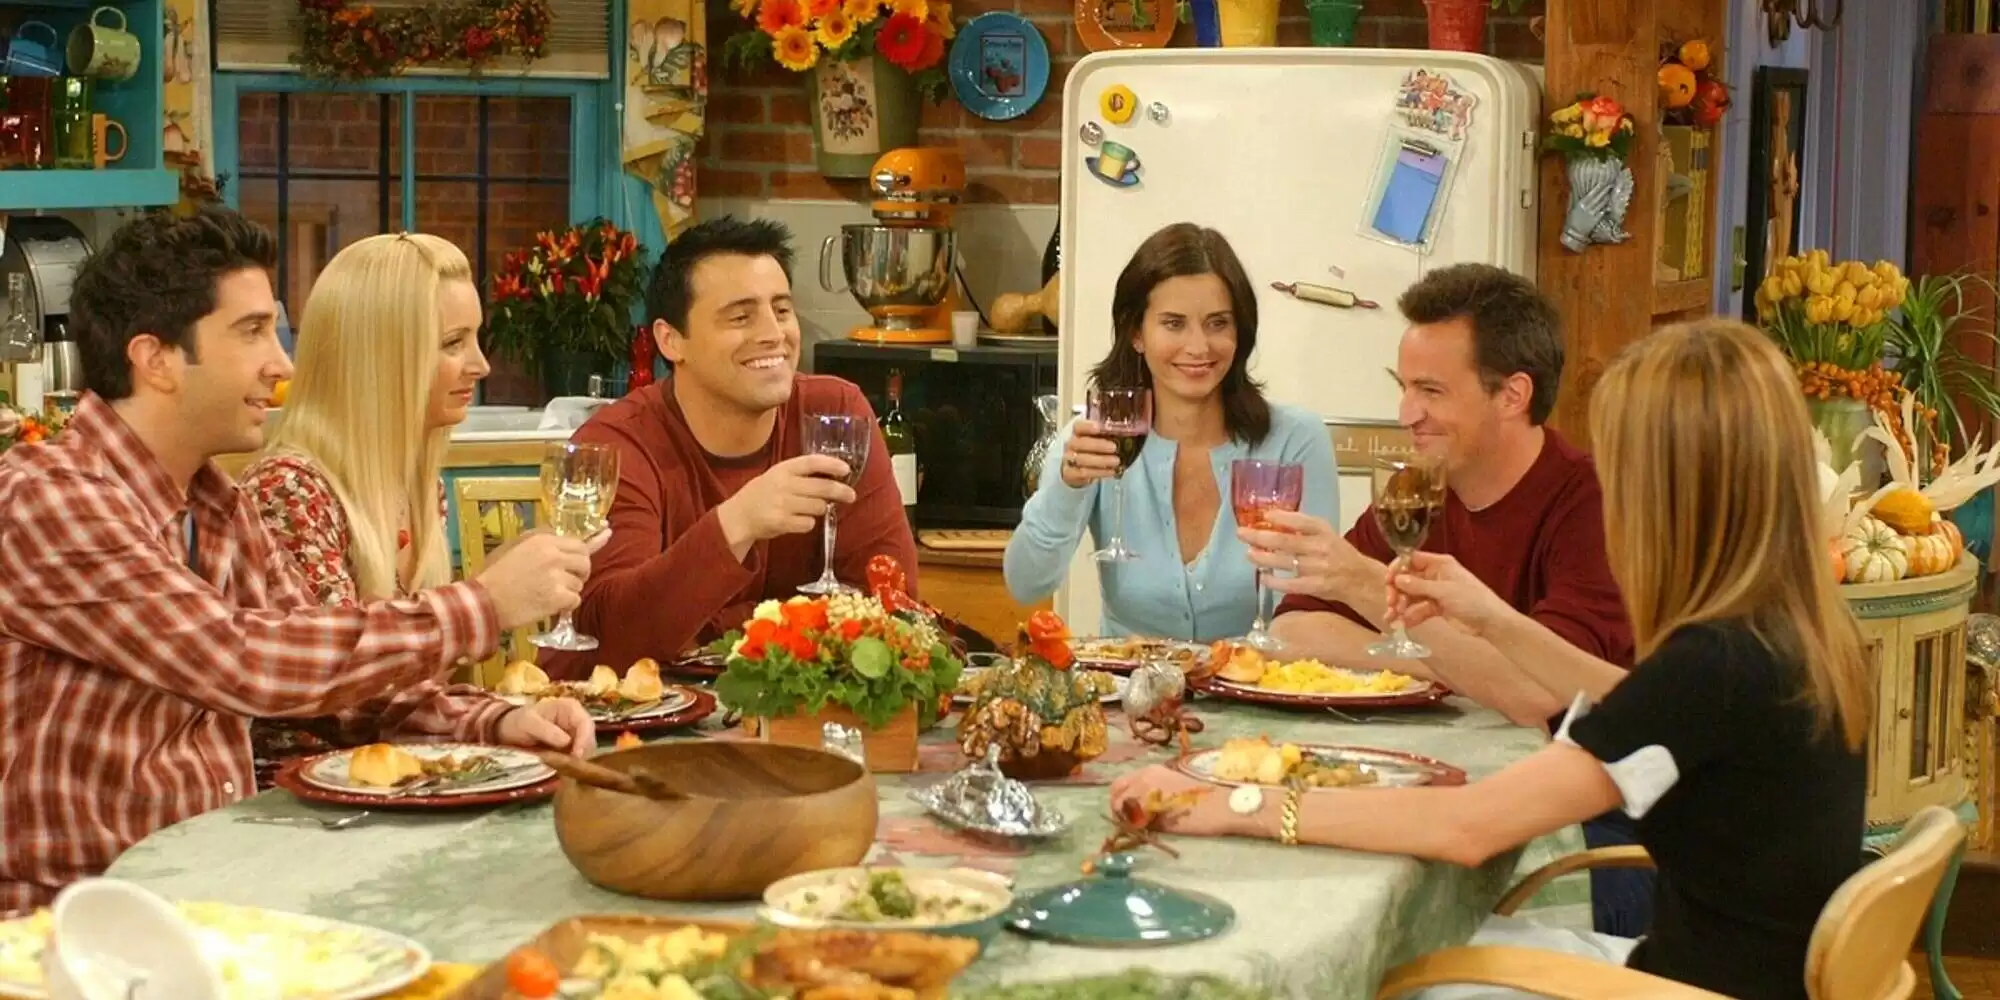 Thanksgiving Movies vs Thanksgiving TV Episodes: Why Almost Never?